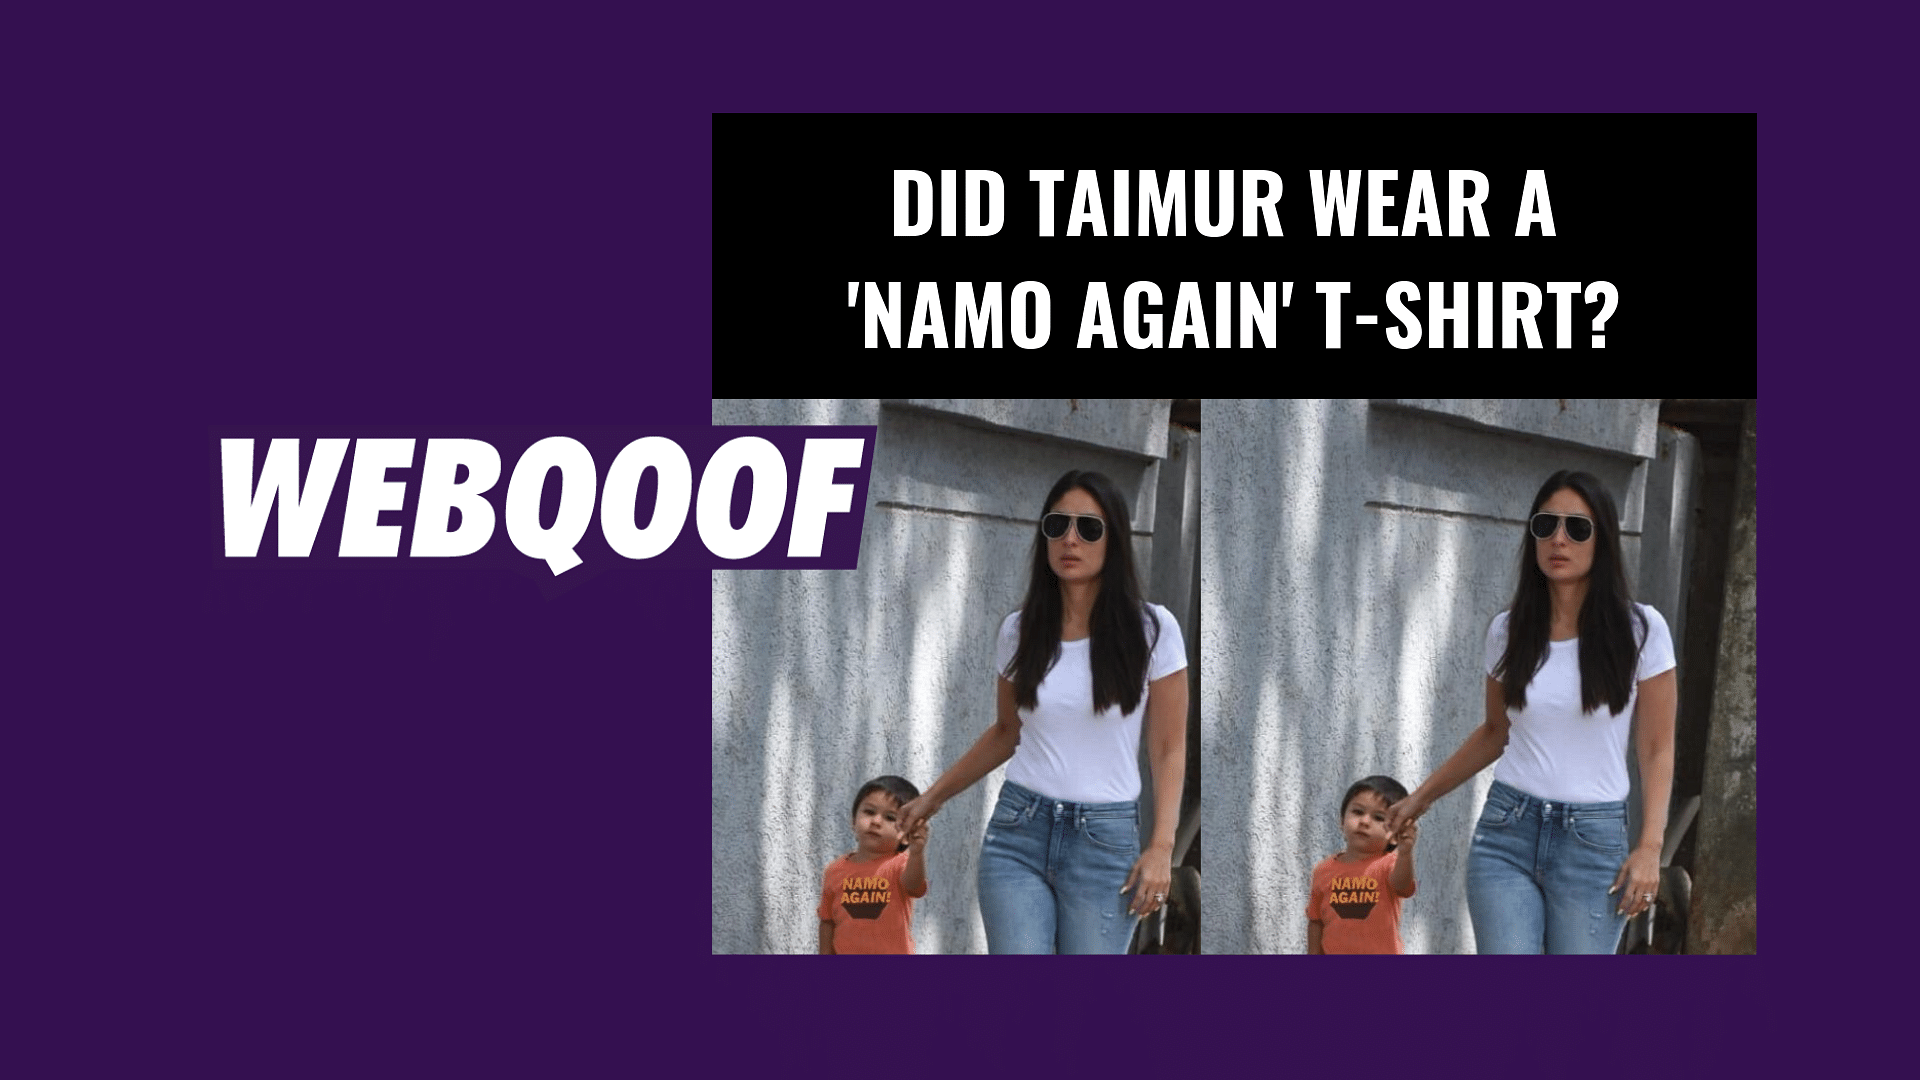 The image being circulated on social media falsely claims that Taimur Ali Khan wore a ‘NaMo Again’ T-shirt.